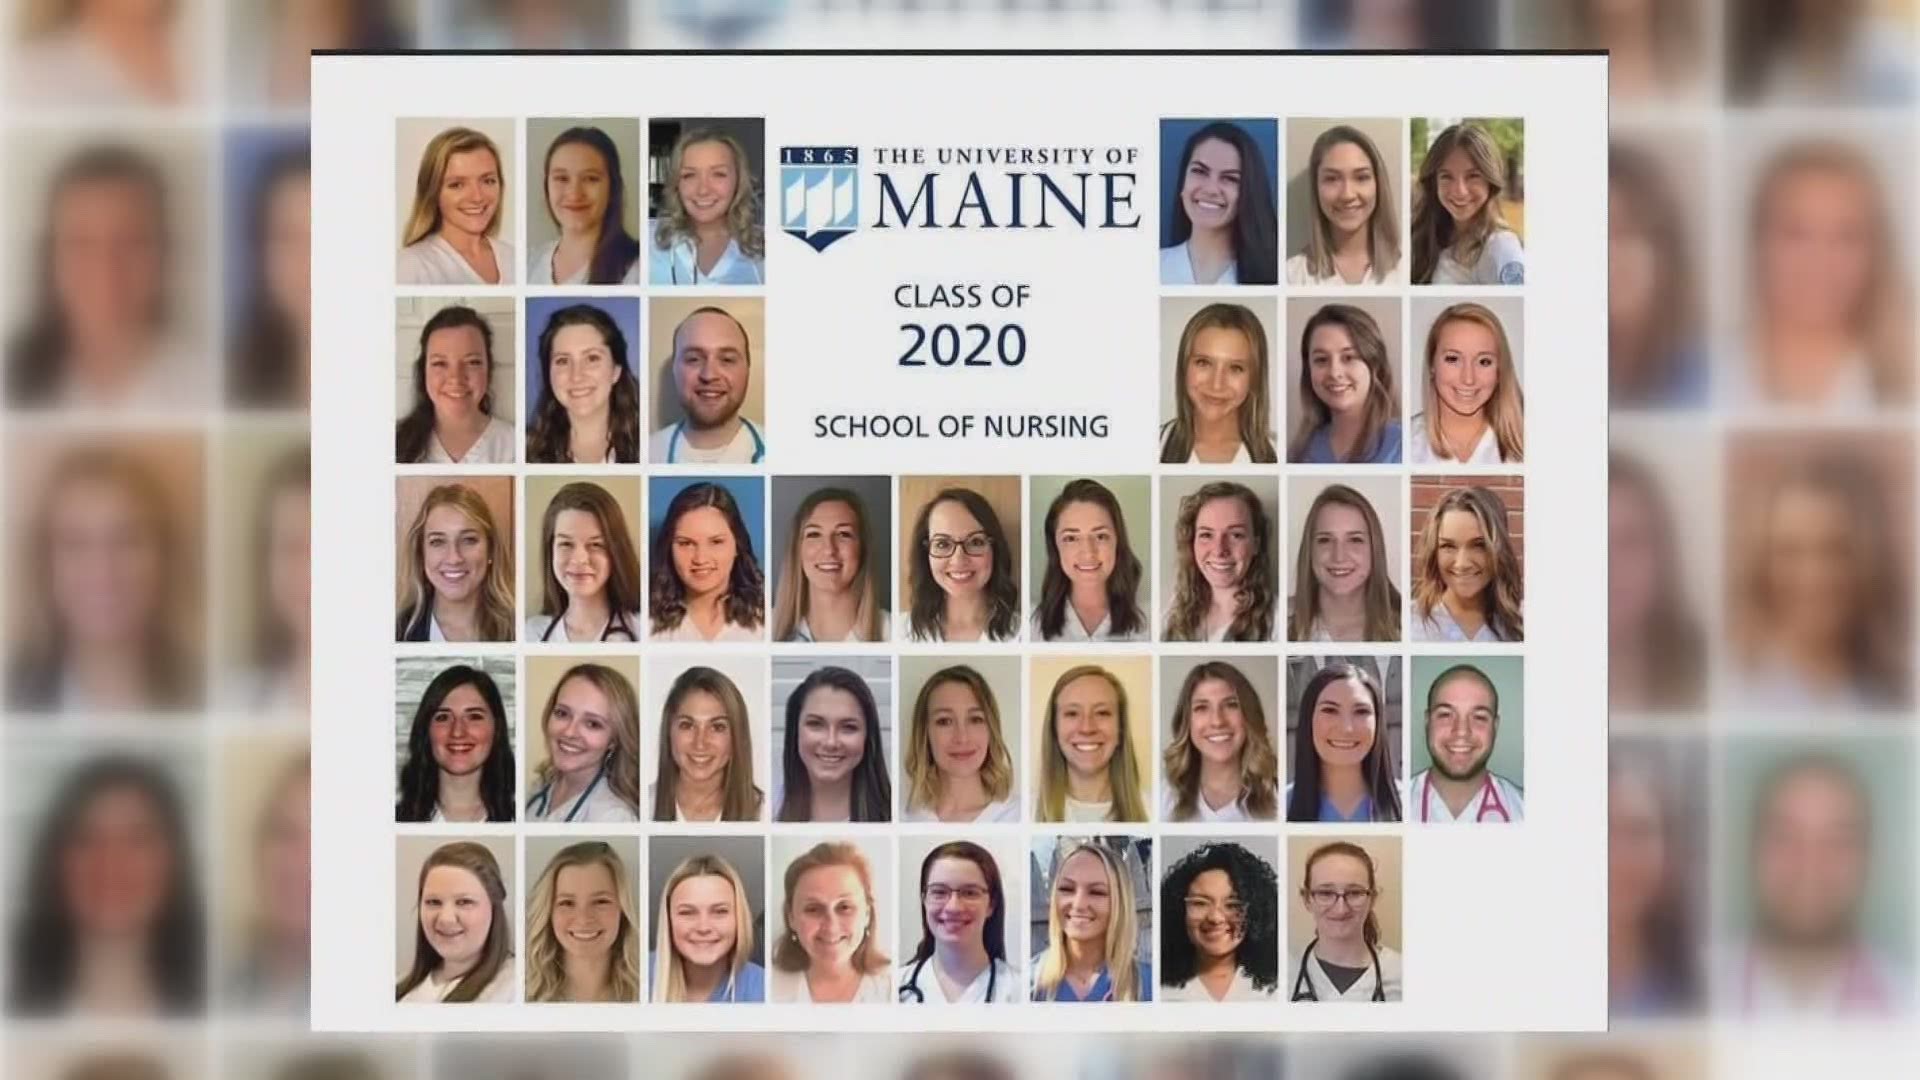 38 students from the University of Maine School of Nursing will graduate two weeks early to help join fight against COVID-19